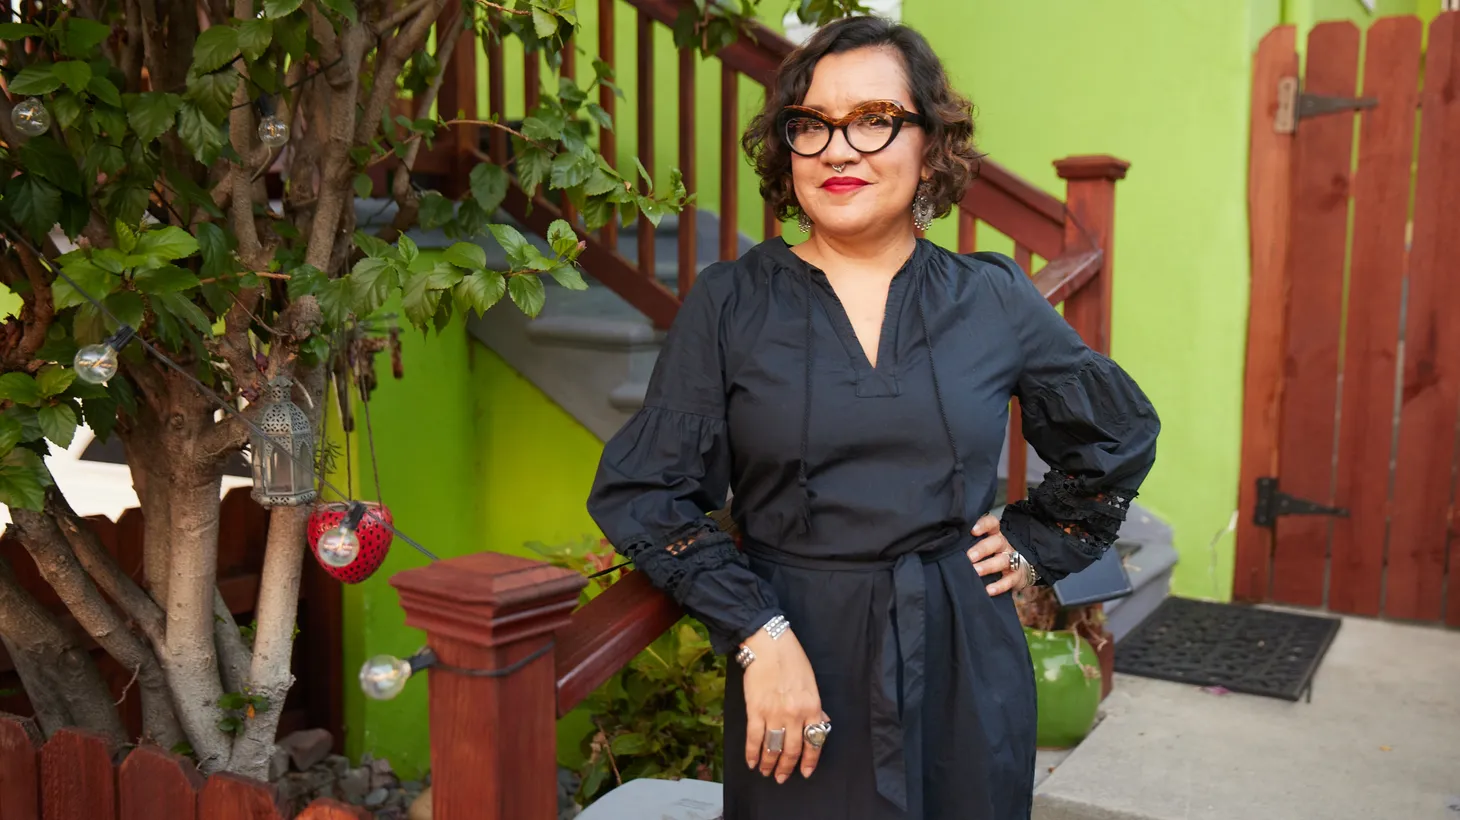 Music is what gives MacArthur genius and 'artivista' Martha Gonzalez life